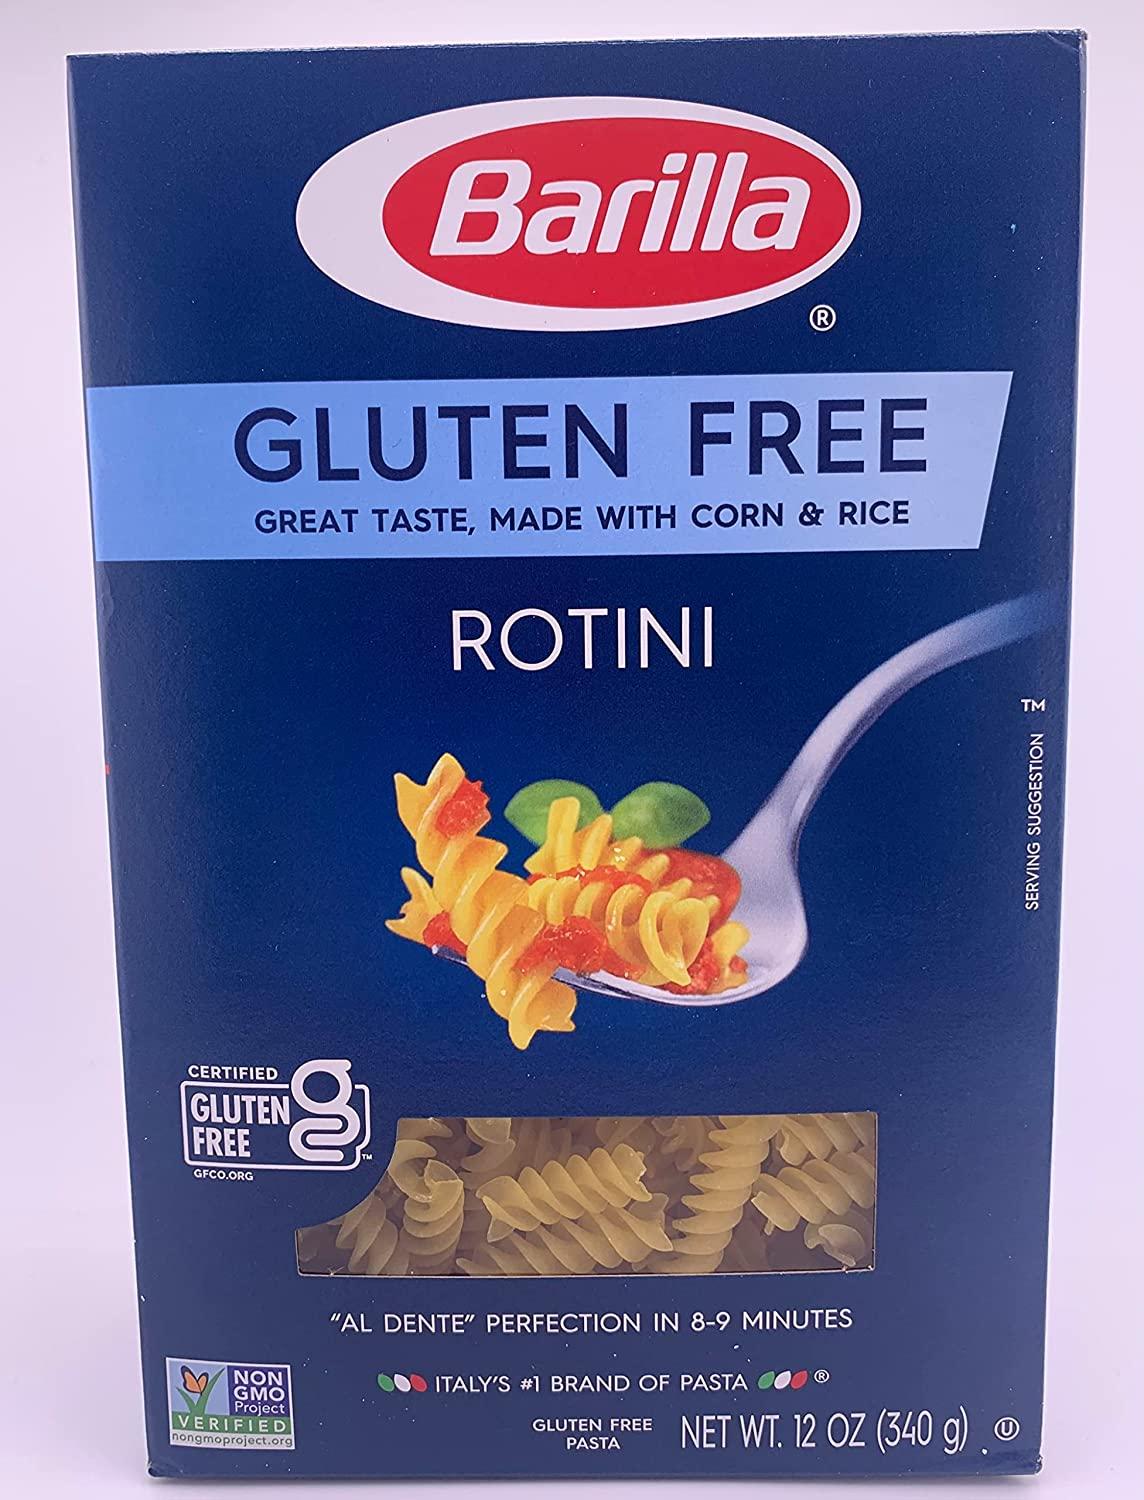 Penne Pasta, Includes Pasta 12oz Bulk Macaroni Variety Inspired Rotini Candy Free x Gluten Barilla Pack- Pasta, by Pasta Barilla (3 Noodles. and Set Pasta Elbow